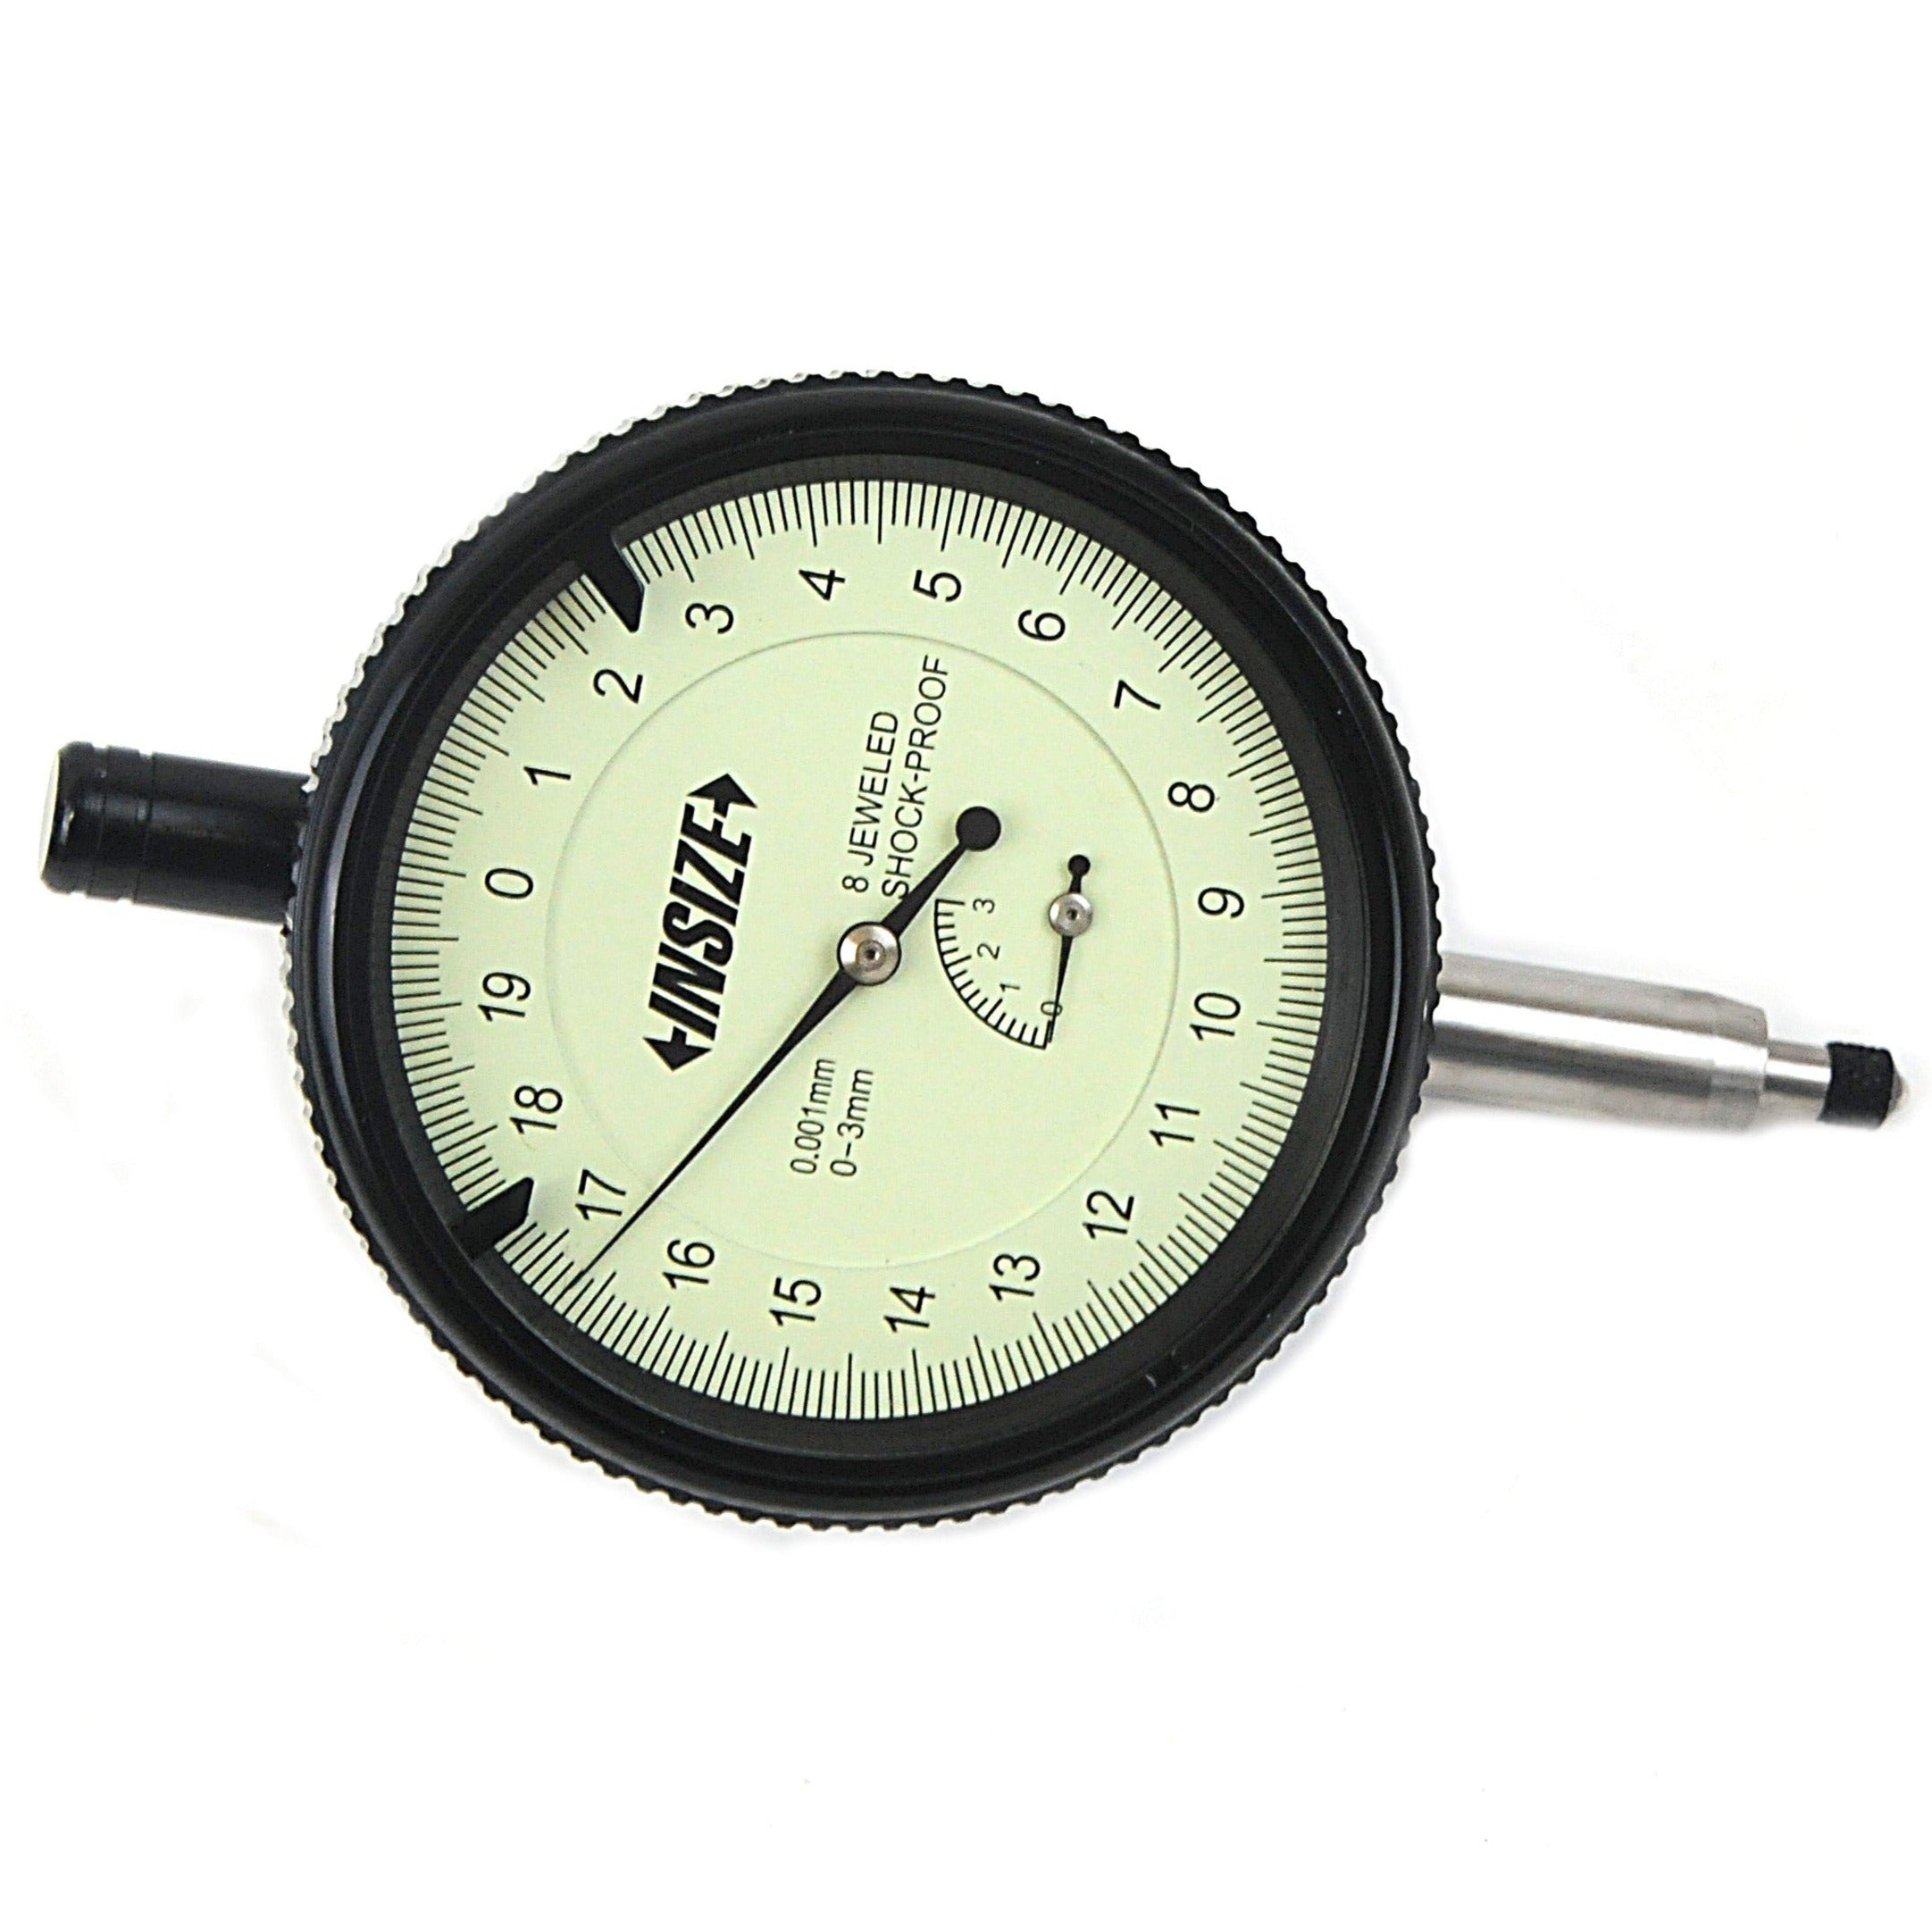 Insize Precision Dial Indicator 3mm Range Series 2313-3A